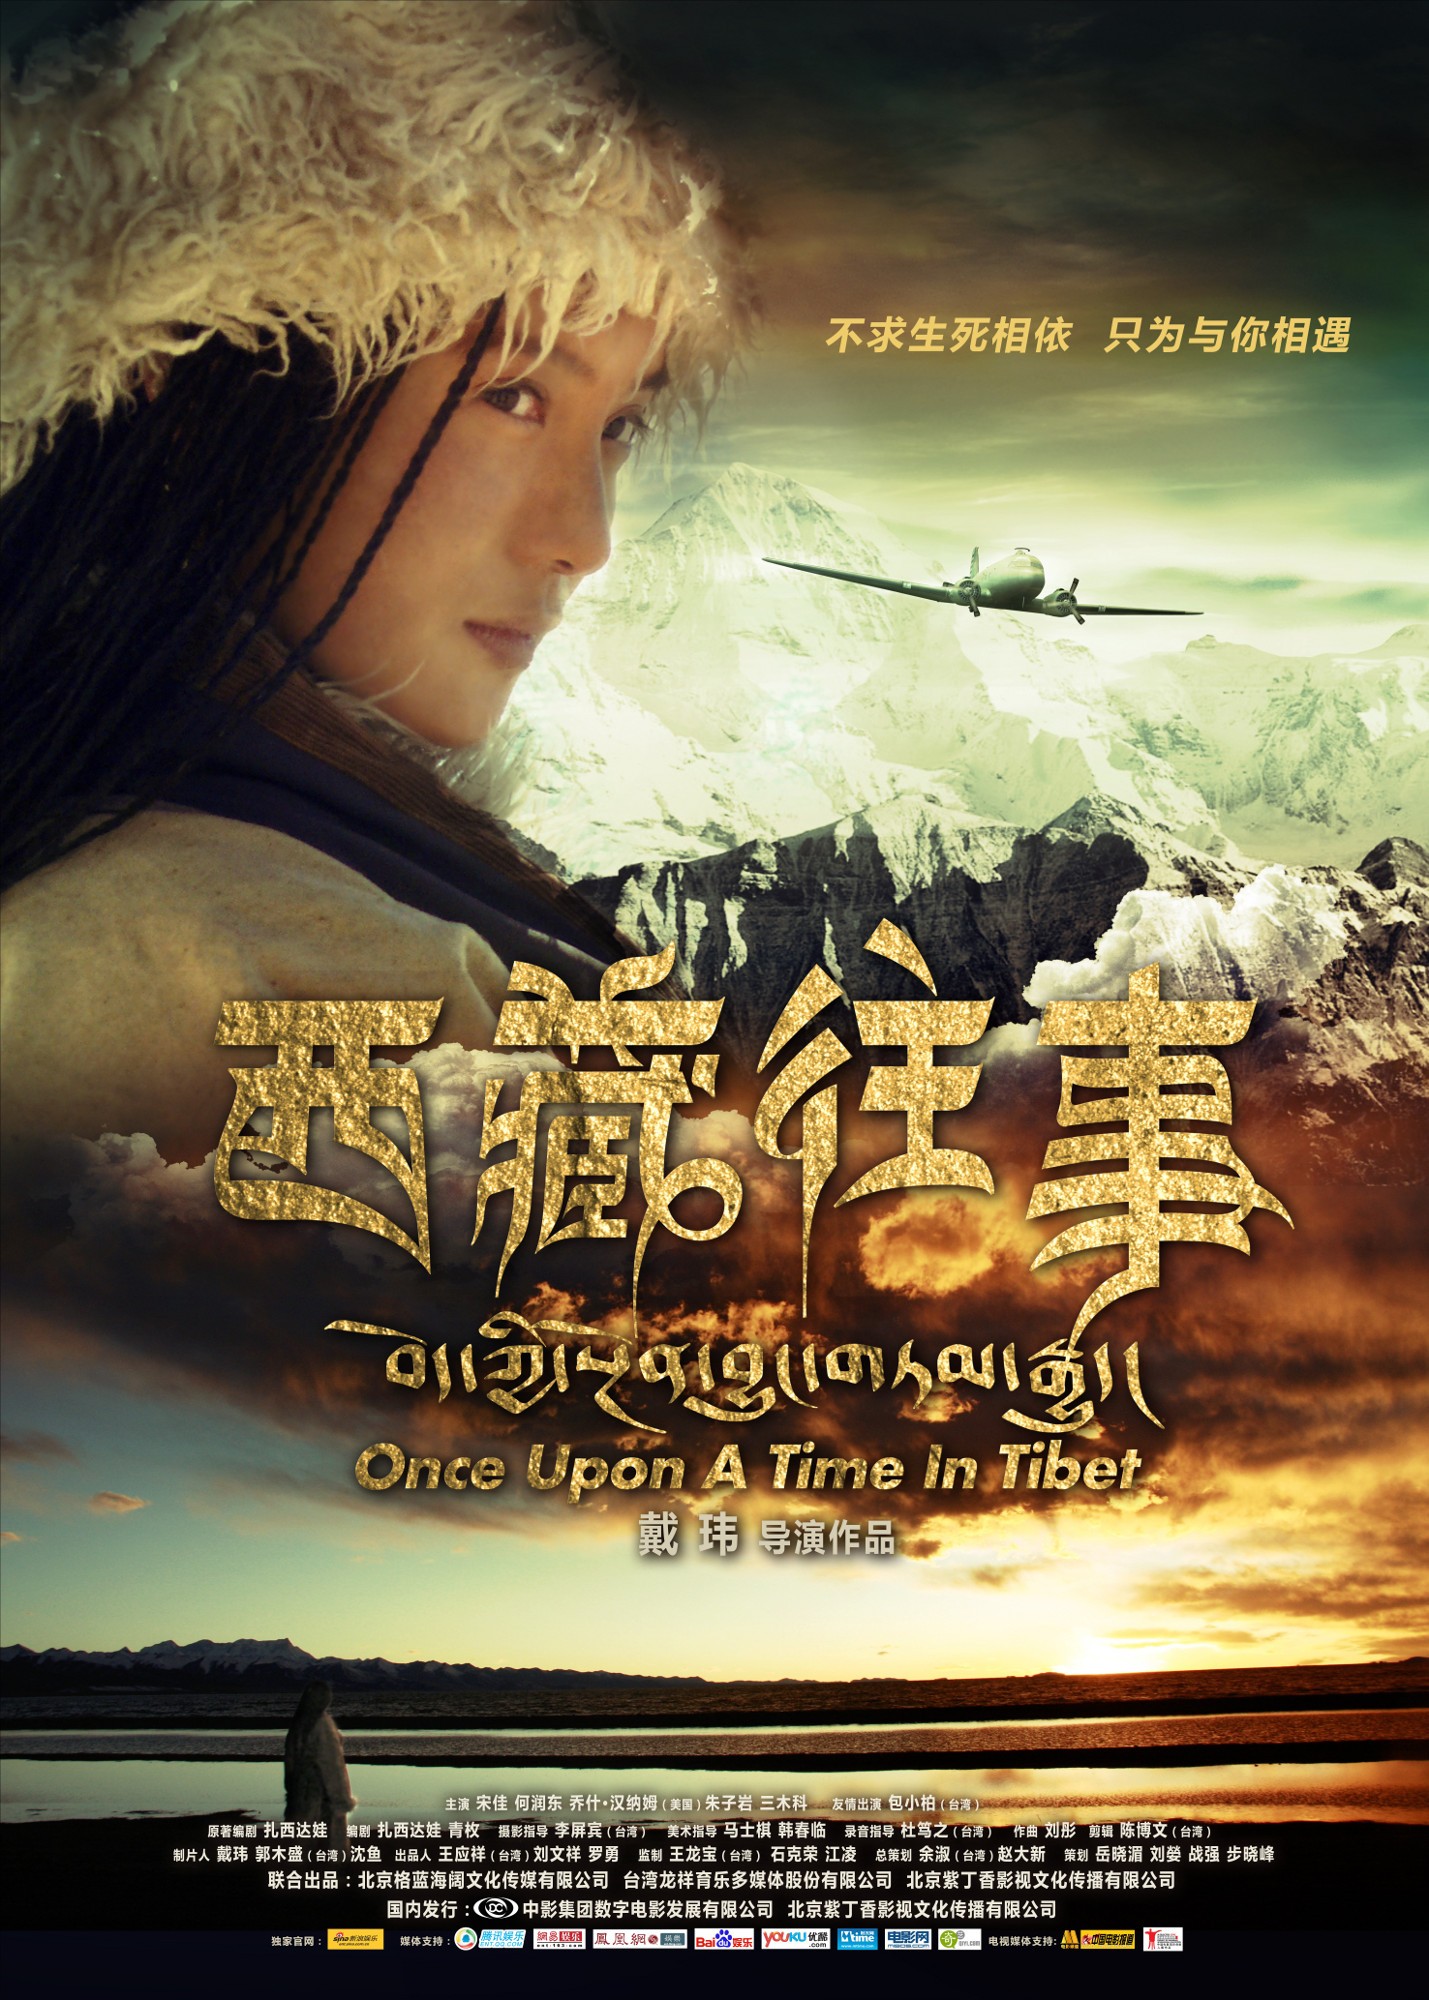 Mega Sized Movie Poster Image for Once Upon a Time in Tibet (#4 of 4)